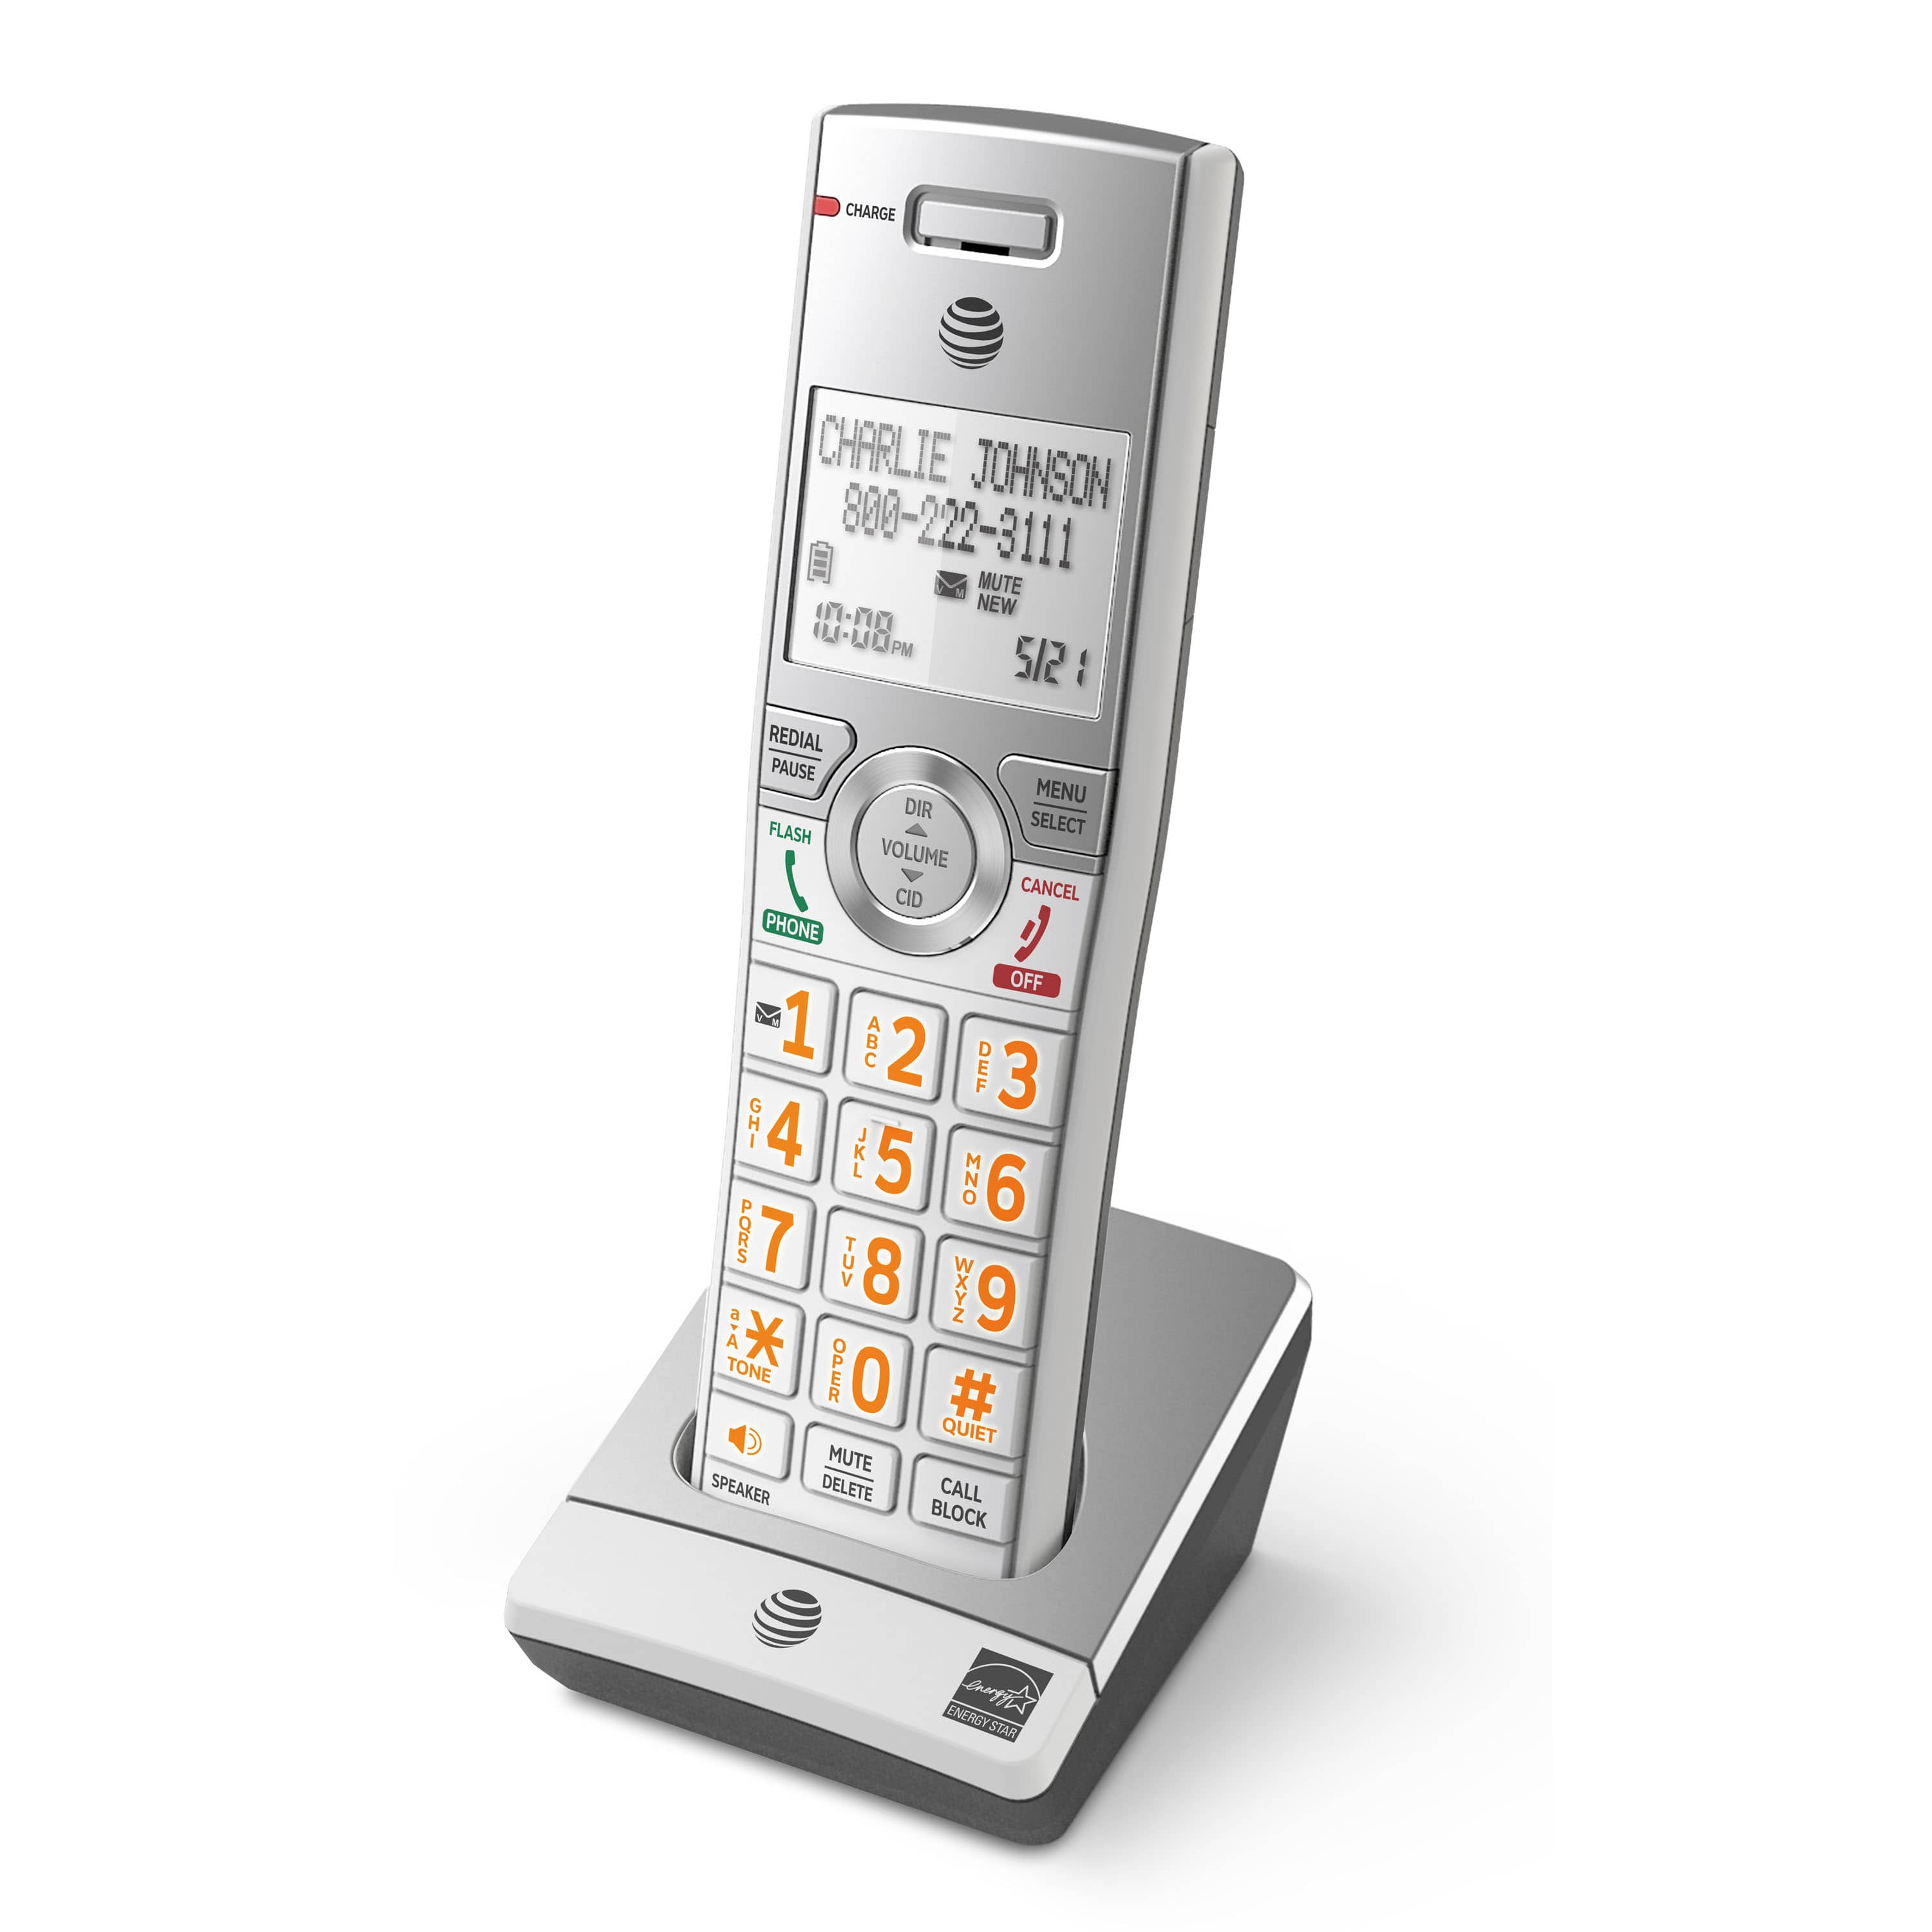 4 handset phone system with smart call blocker - view 5